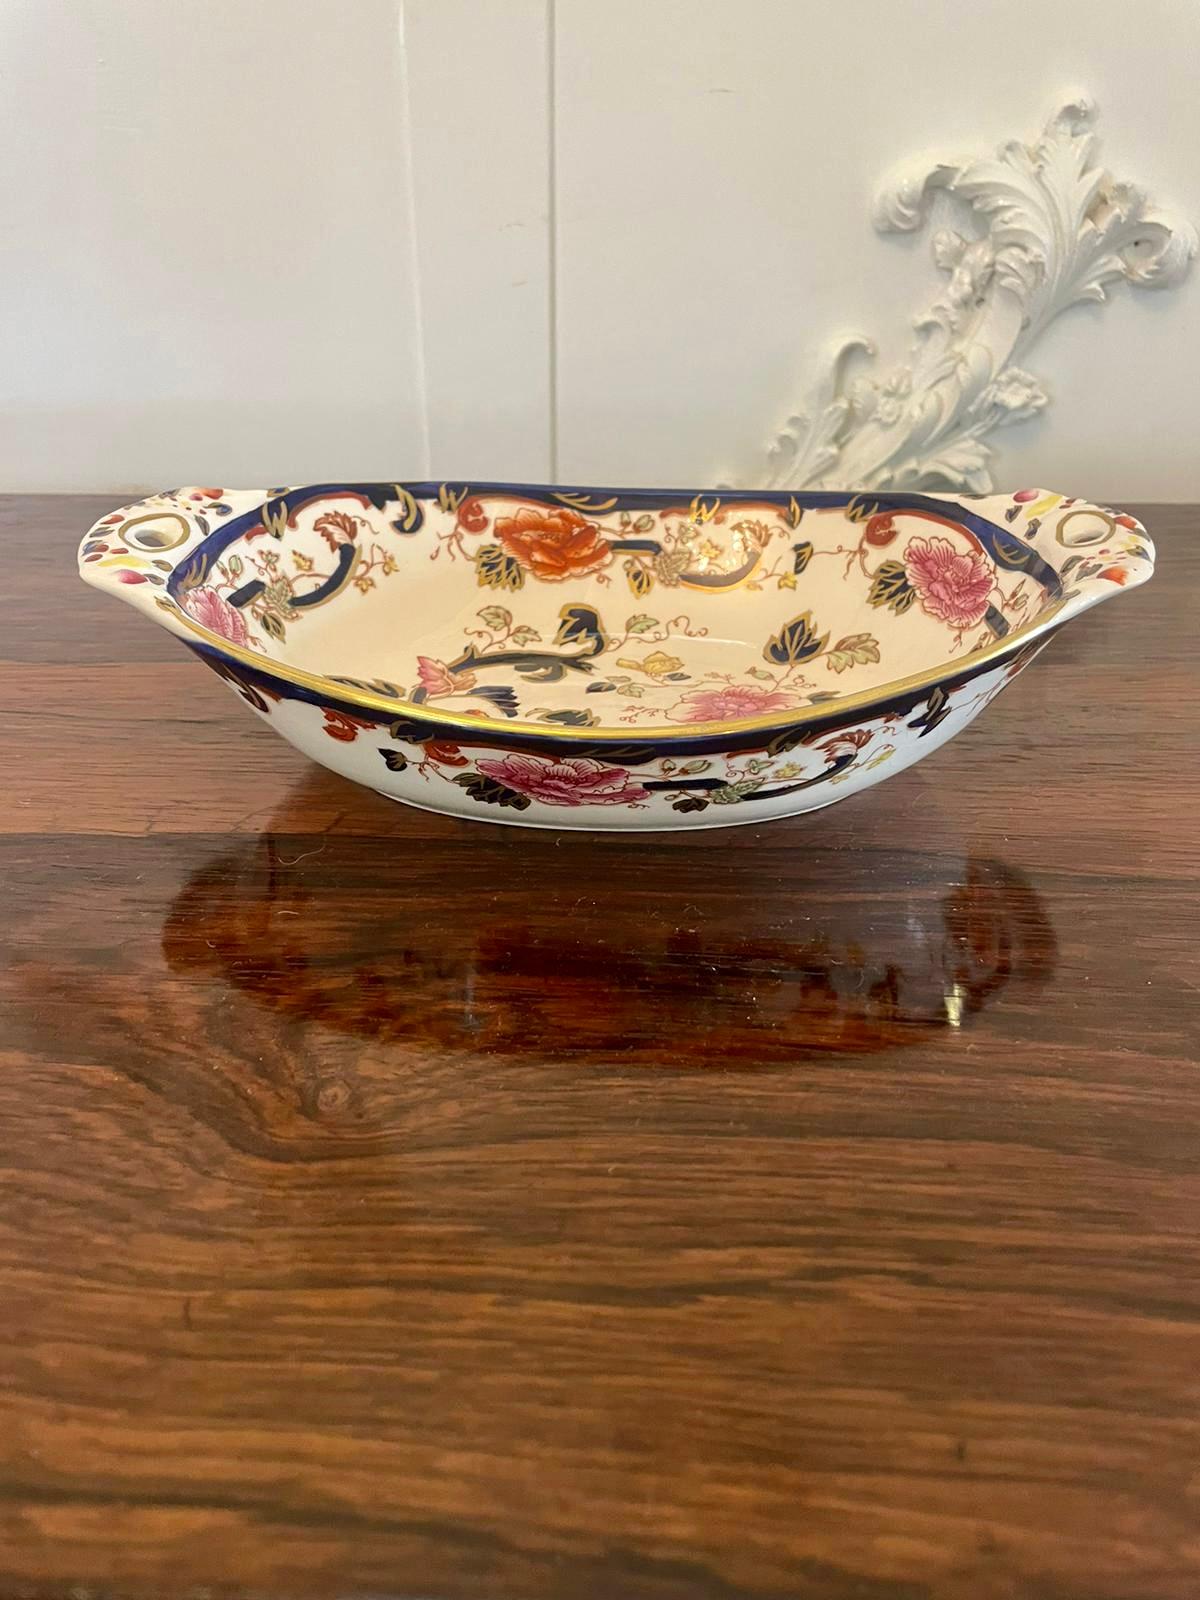 Quality antique hand painted Masons Ironstone bowl with fantastic quality hand painted decoration in red, pink, yellow, blue, green and gold colours 


A beautifully decorated bowl in mint condition


Dimensions:
Height 6 x Width 26.5 x Depth 17